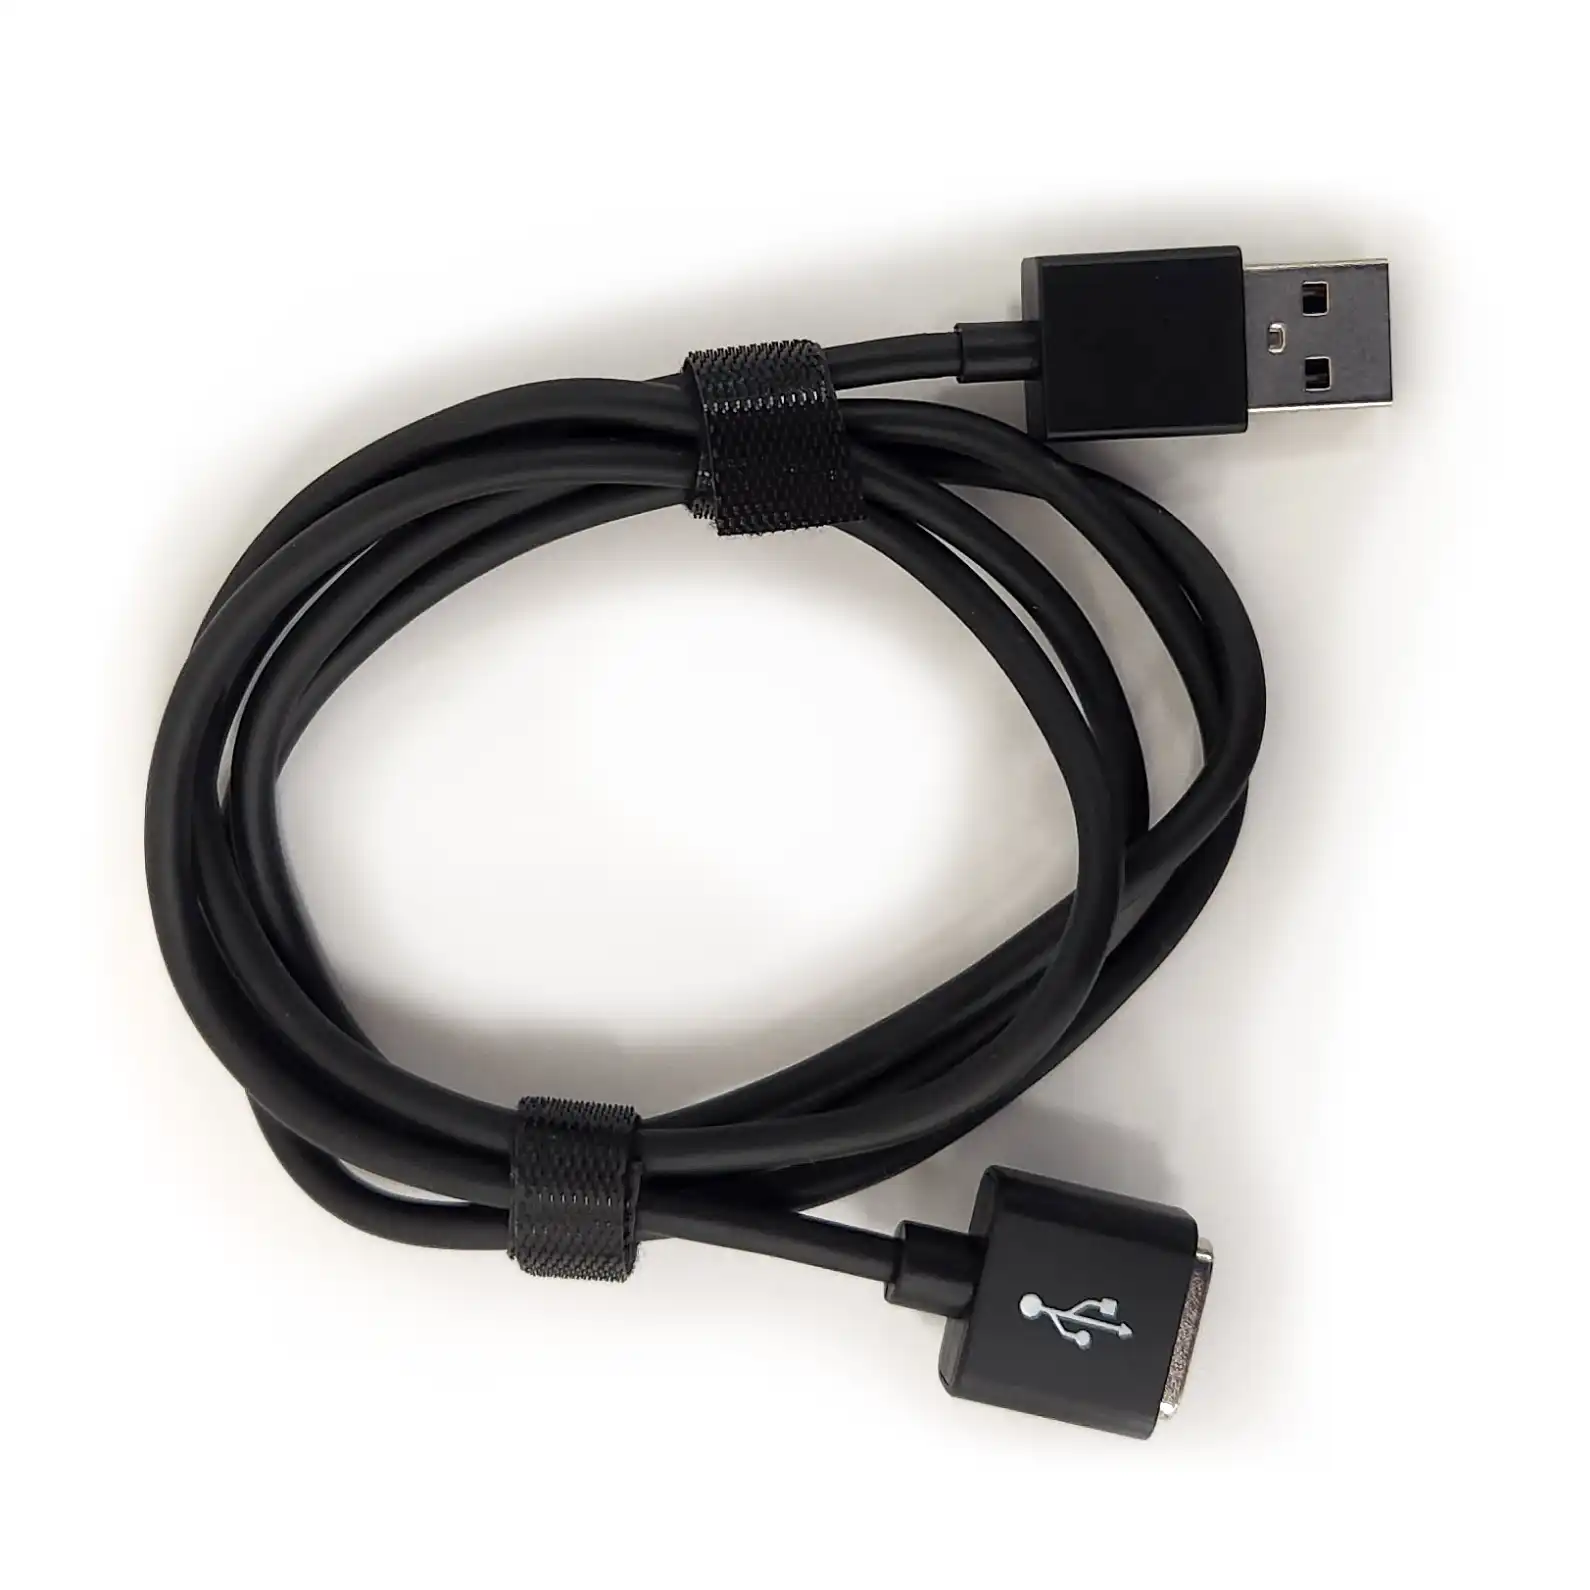 Freelap USB Magnetic Pogo Cable